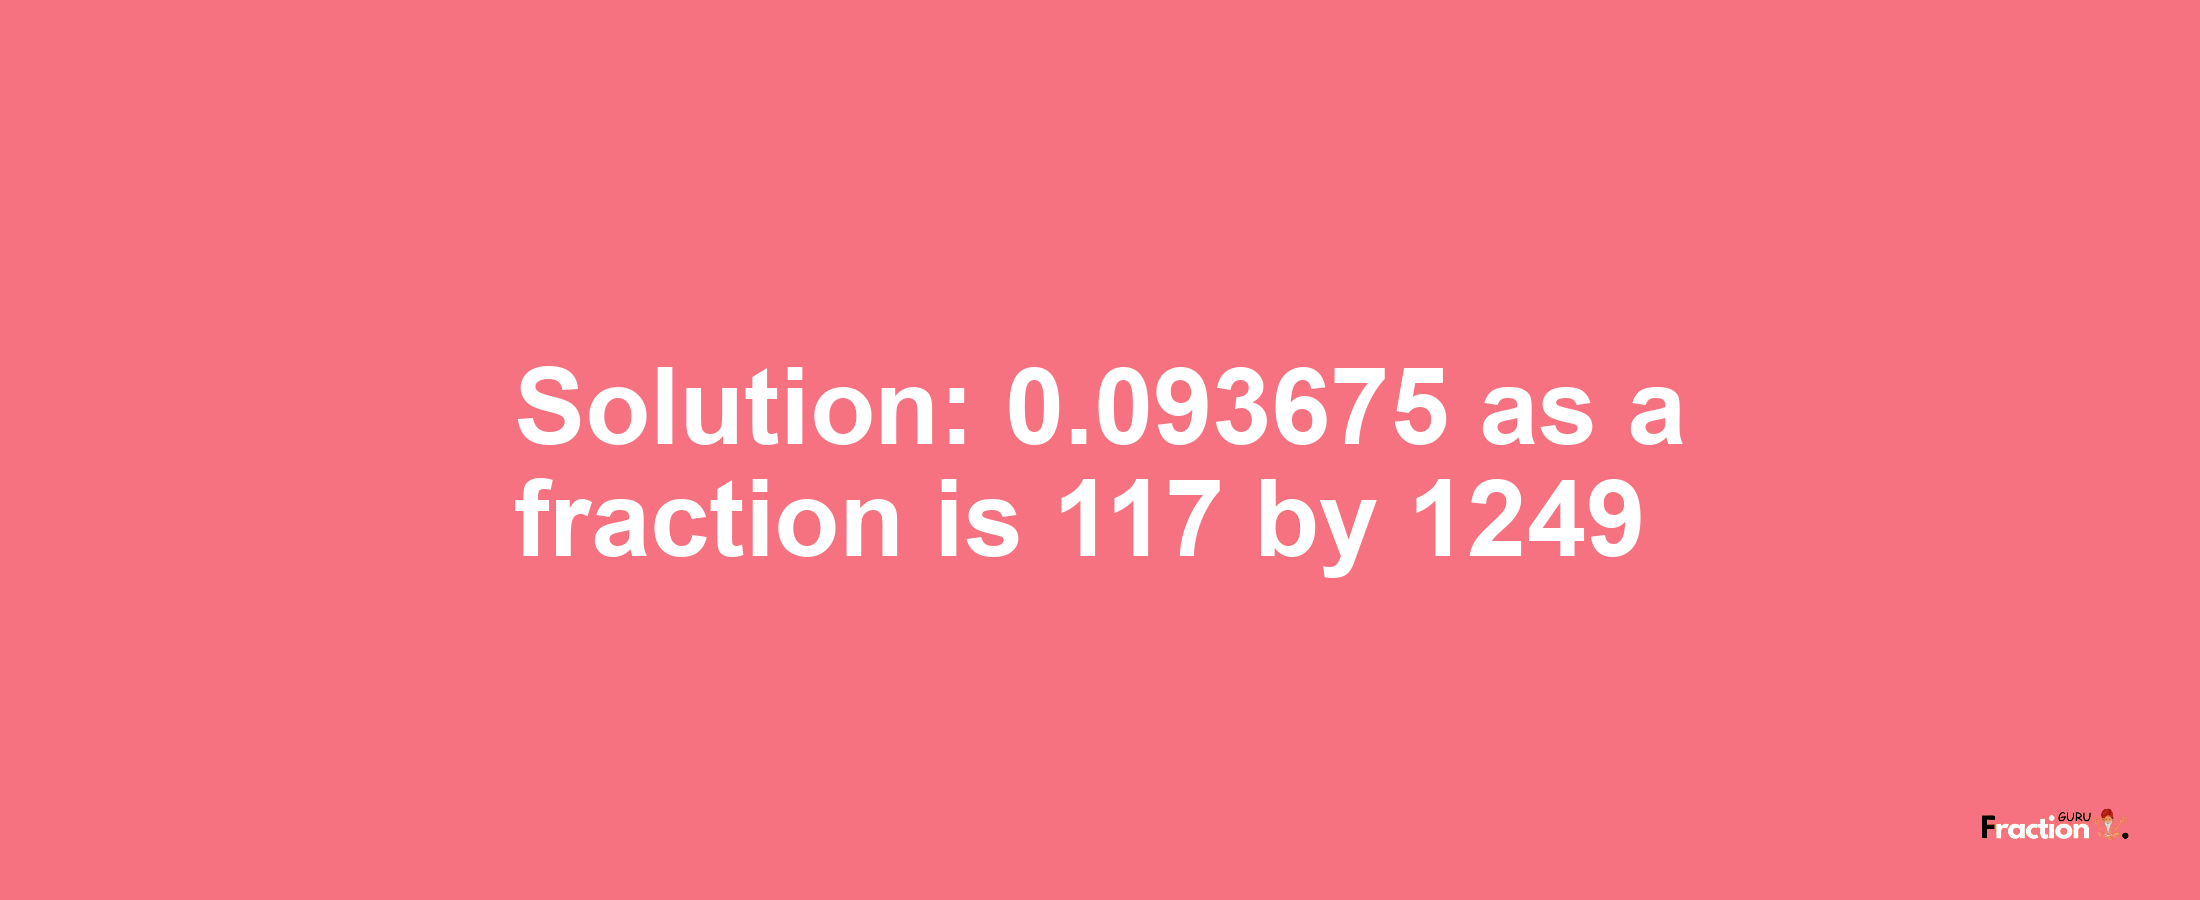 Solution:0.093675 as a fraction is 117/1249